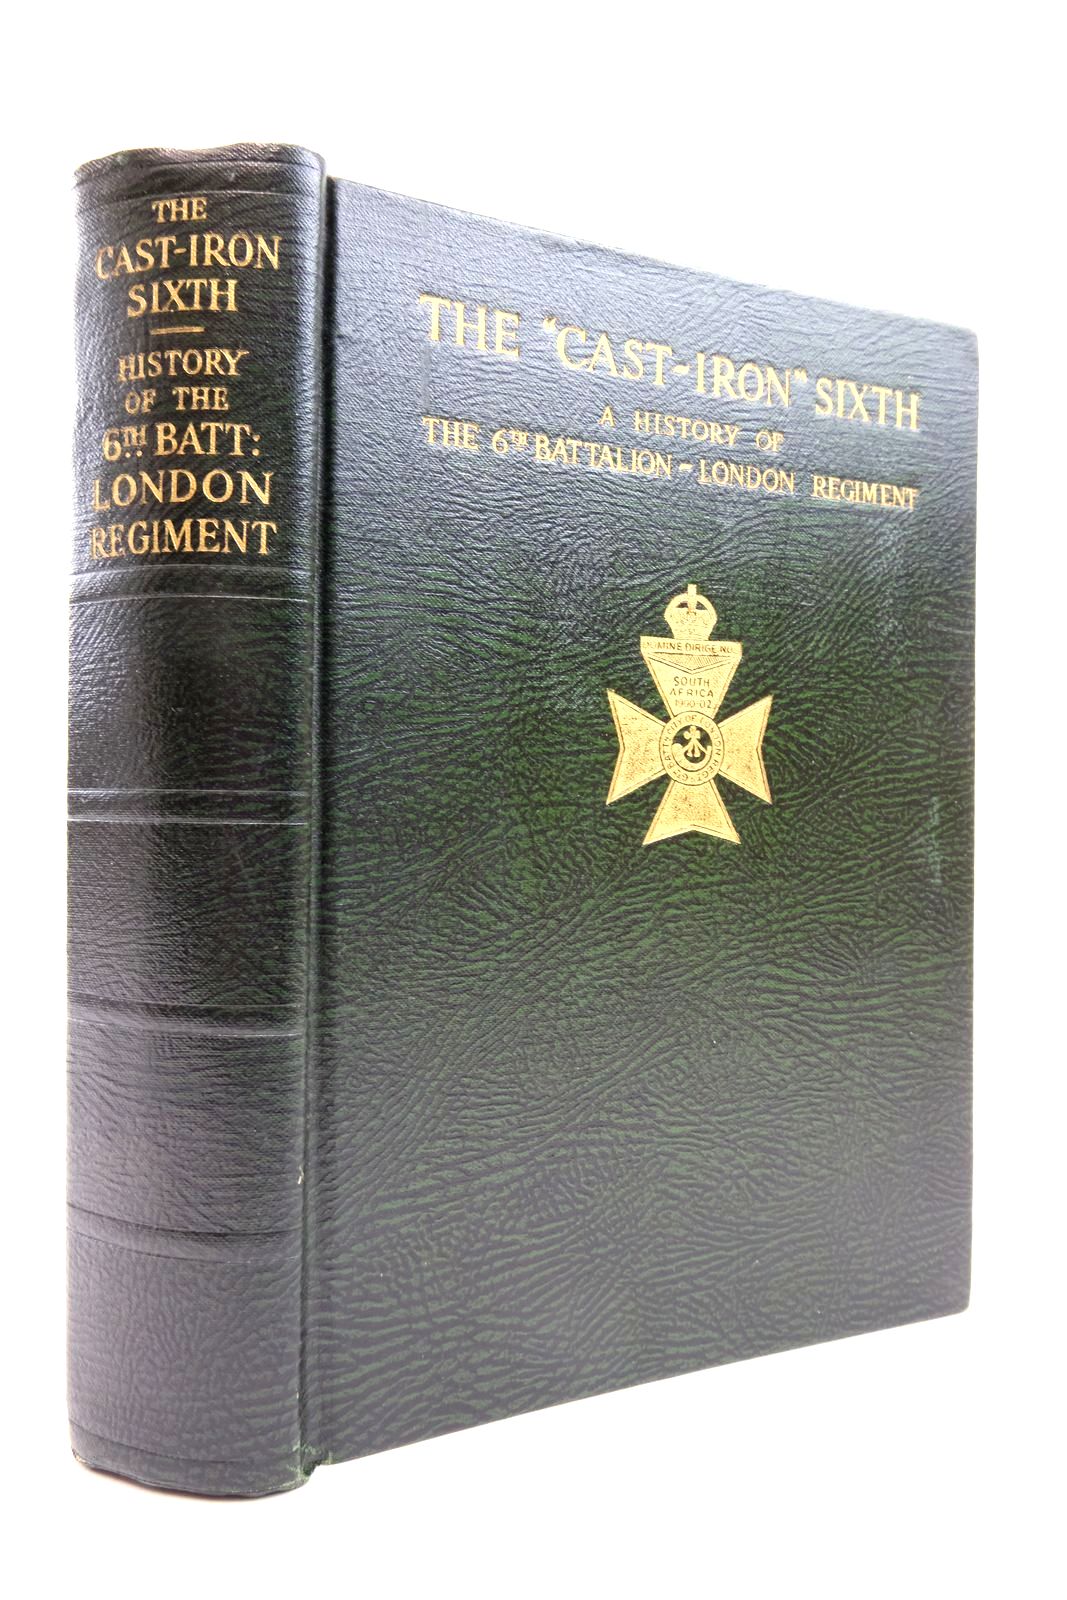 Photo of THE "CAST-IRON SIXTH": A HISTORY OF THE SIXTH BATTALION LONDON REGIMENT (THE CITY OF LONDON RIFLES)- Stock Number: 2137377